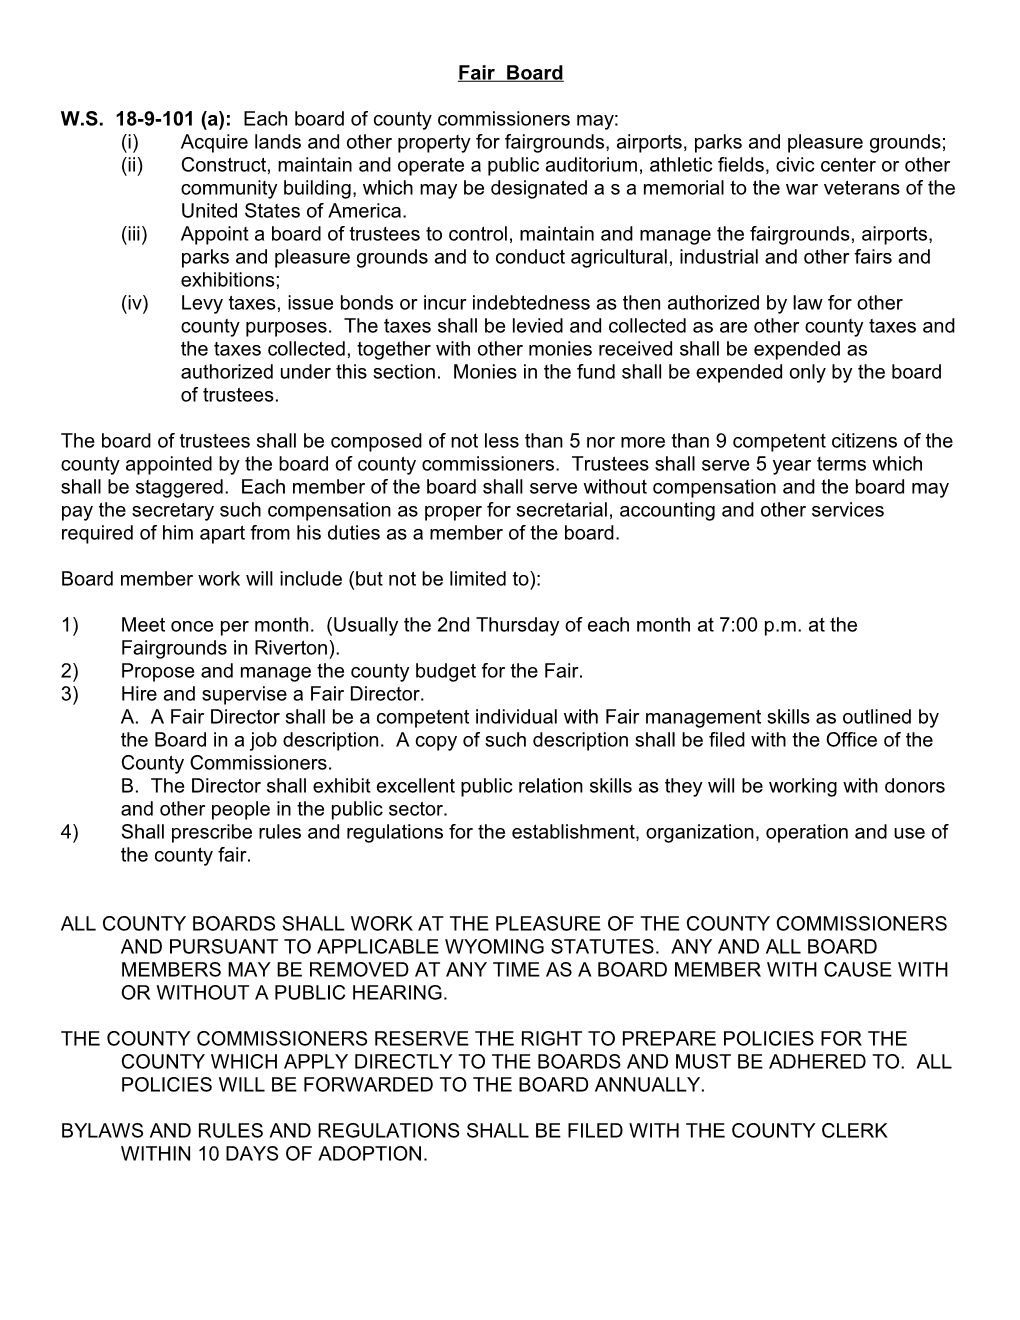 W.S. 18-9-101 (A): Each Board of County Commissioners May